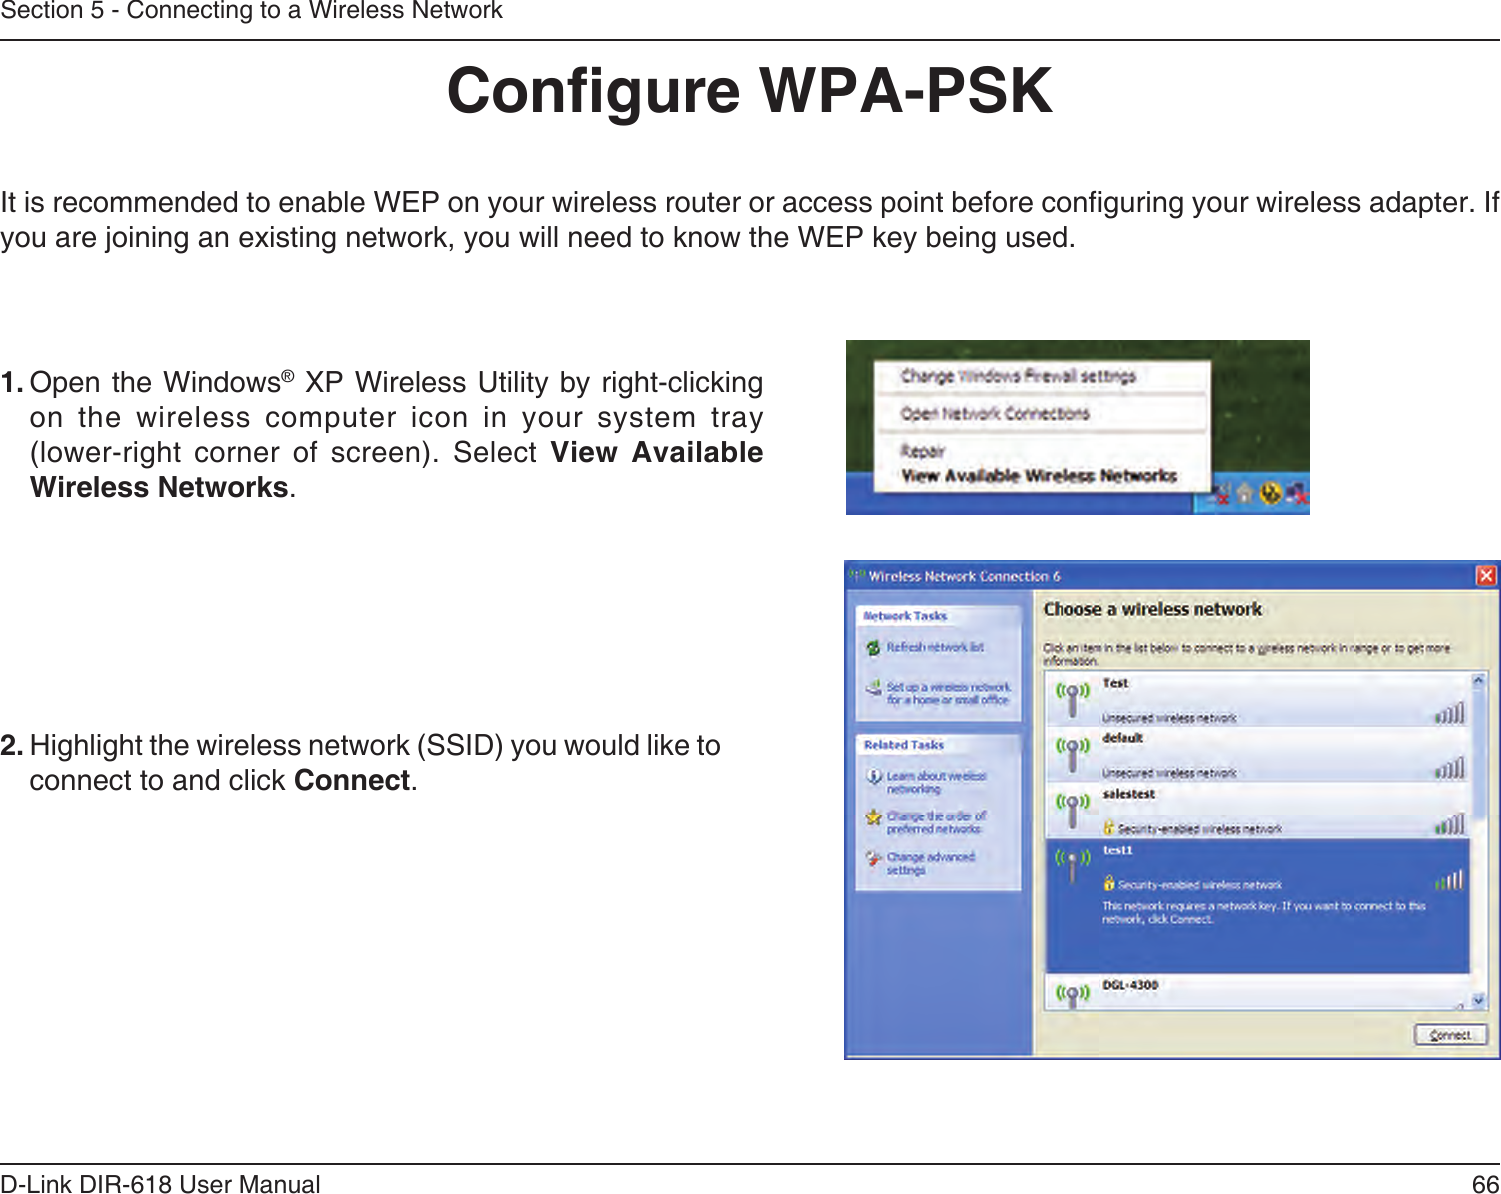 66D-Link DIR-618 User ManualSection 5 - Connecting to a Wireless NetworkCongure WPA-PSKIt is recommended to enable WEP on your wireless router or access point before conguring your wireless adapter. If you are joining an existing network, you will need to know the WEP key being used.2. Highlight the wireless network (SSID) you would like toconnect to and click Connect.1. Open the Windows® XP Wireless Utility by right-clickingon  the  wireless  computer  icon  in  your  system  tray(lower-right  corner  of  screen).  Select  View Available Wireless Networks. 